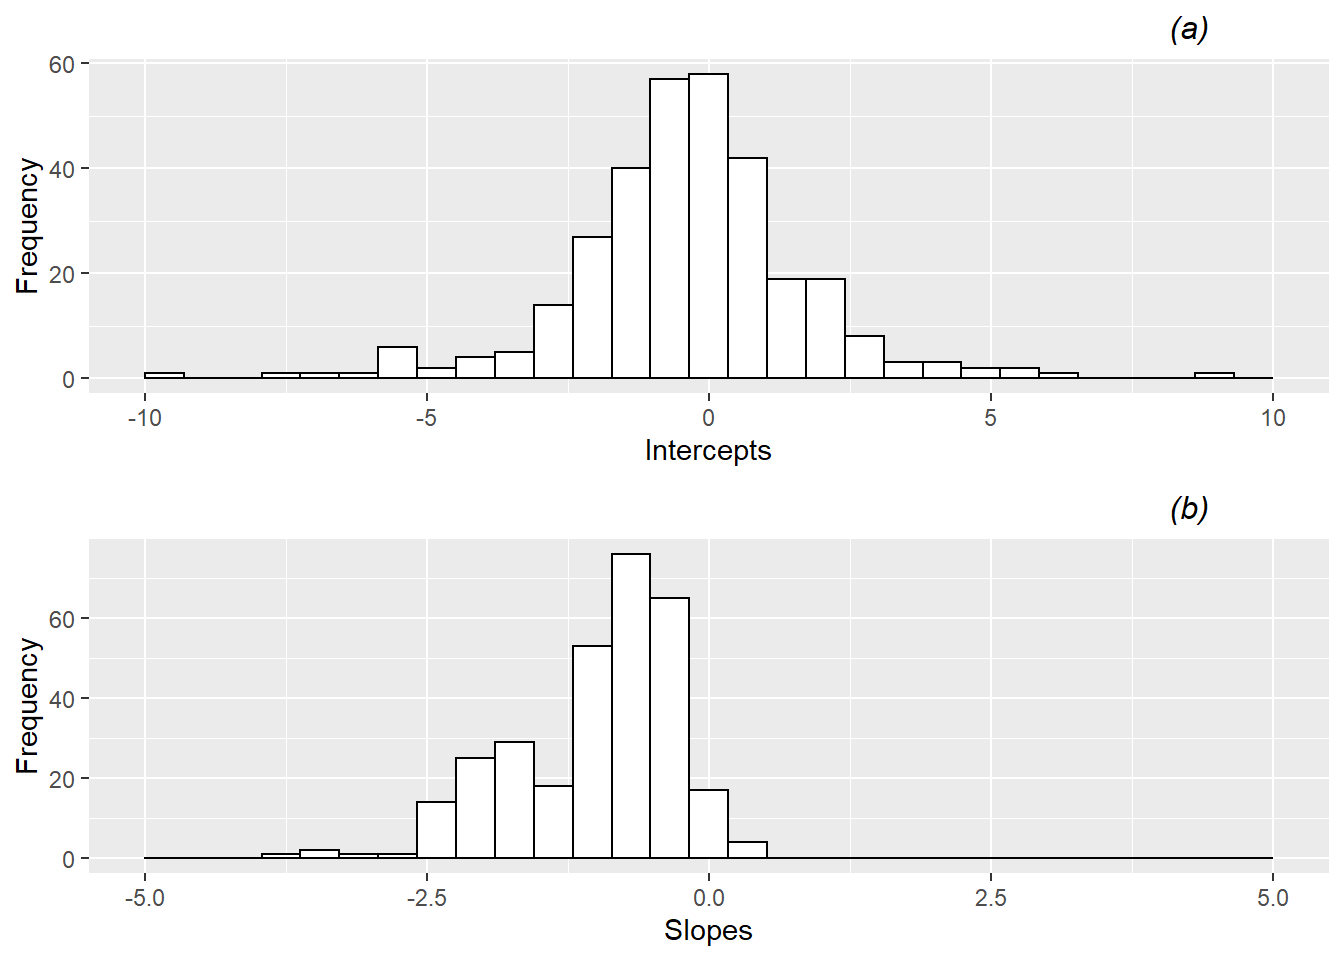 Histograms of (a) intercepts and (b) slopes from fitting simple logistic regression models by game.  Several extreme outliers have been cut off in these plots for illustration purposes.